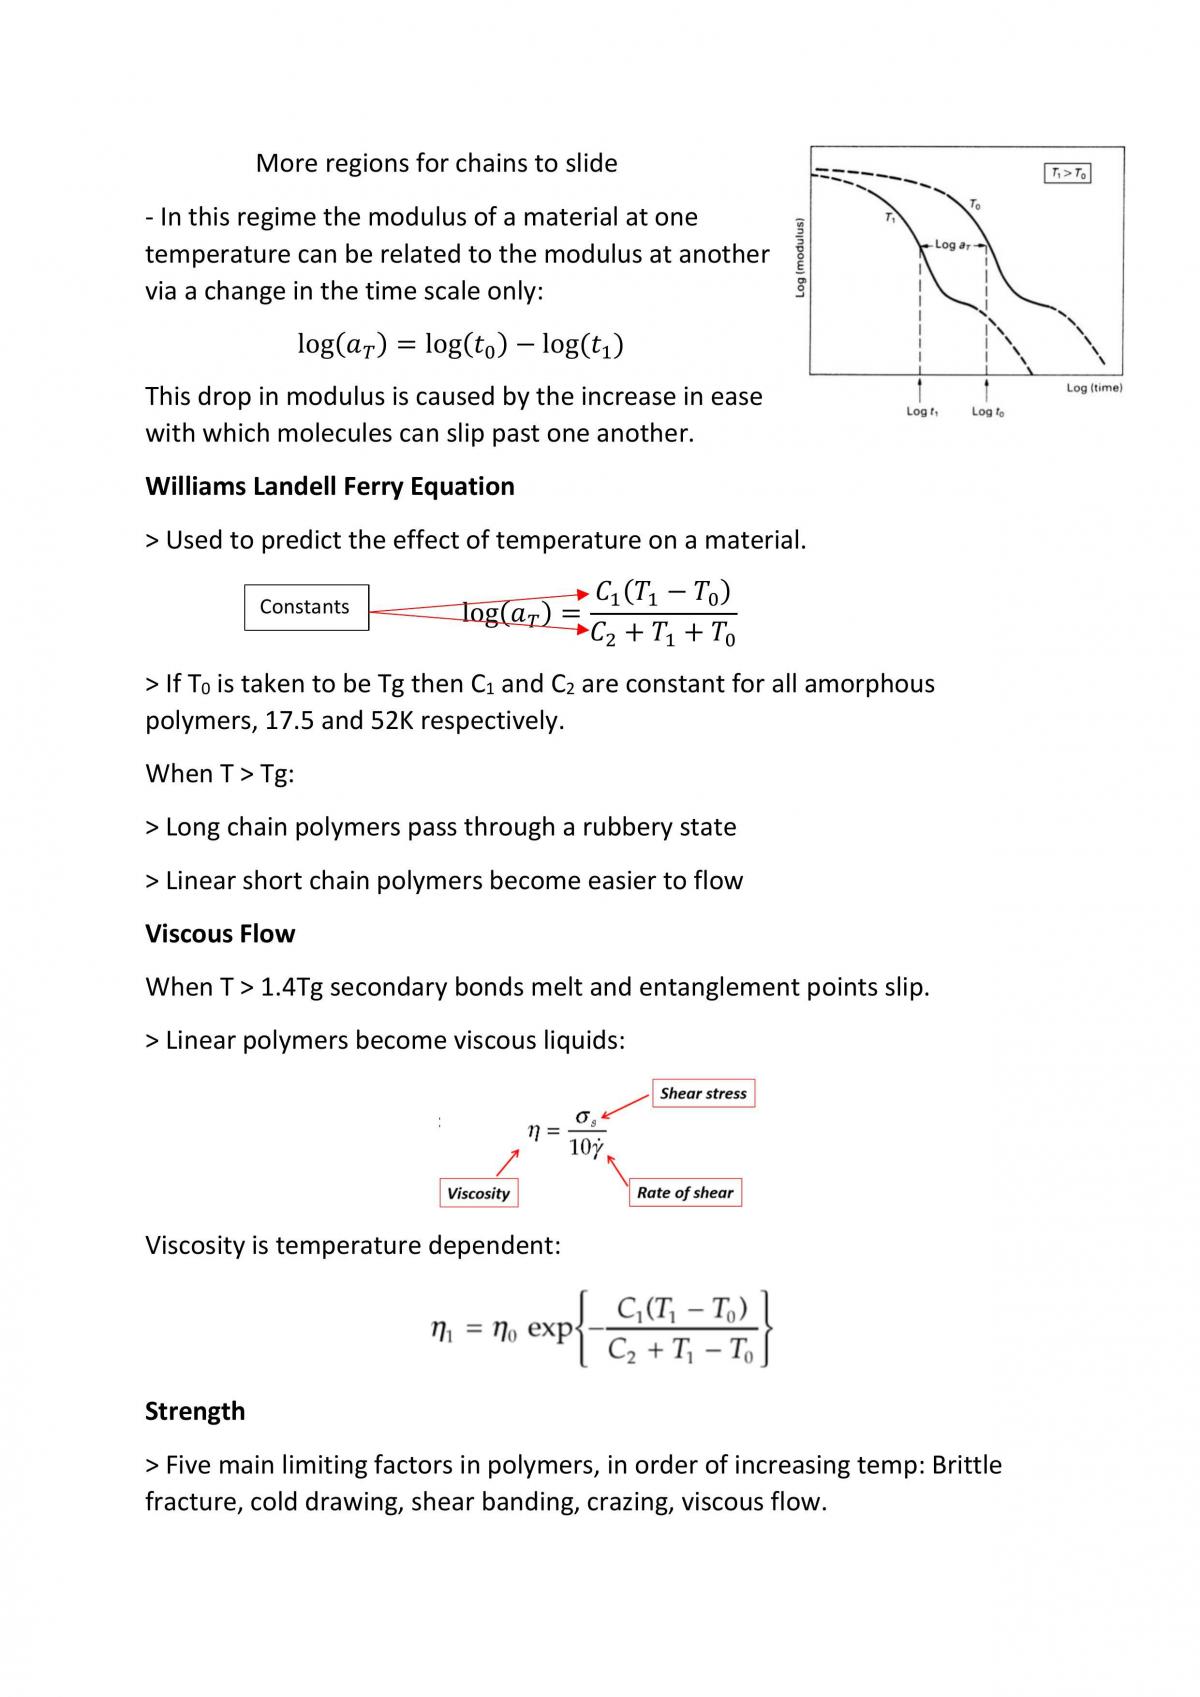 Study Notes for Mechanics of Materials - Page 27